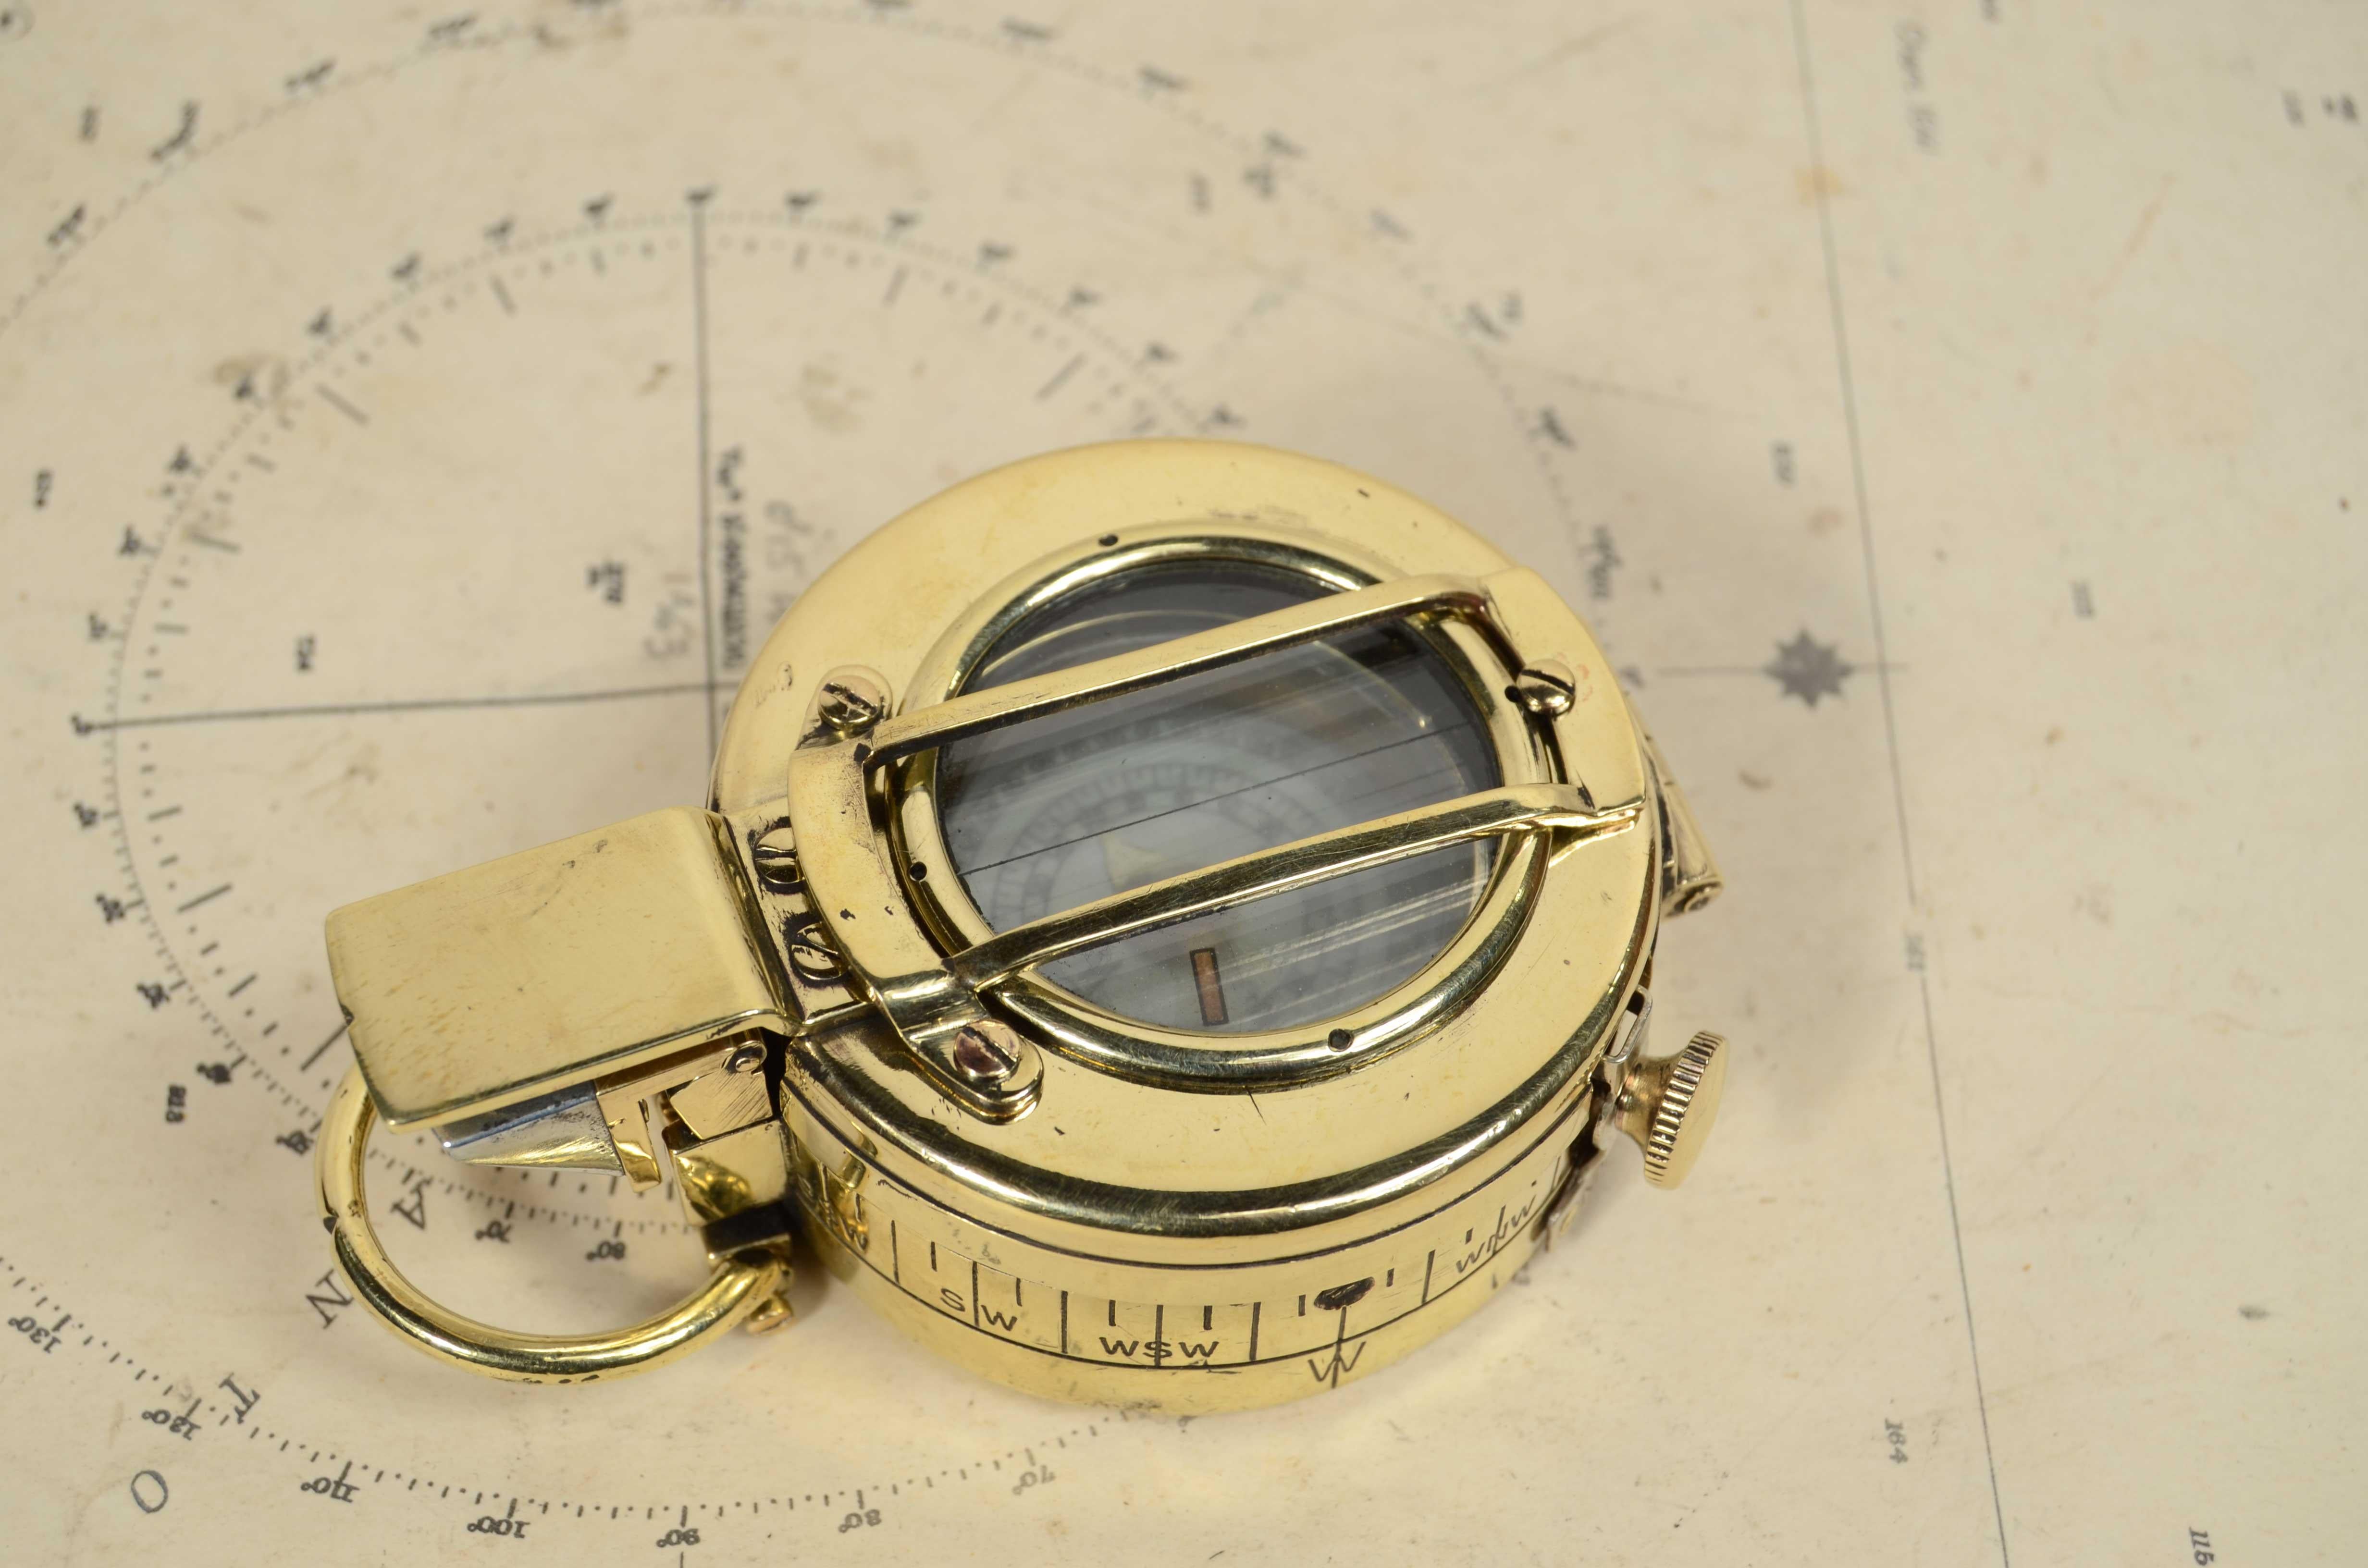 Prismatic compass  by detection signed T.G. Co Ltd London no. B 21681 1940 MK For Sale 8